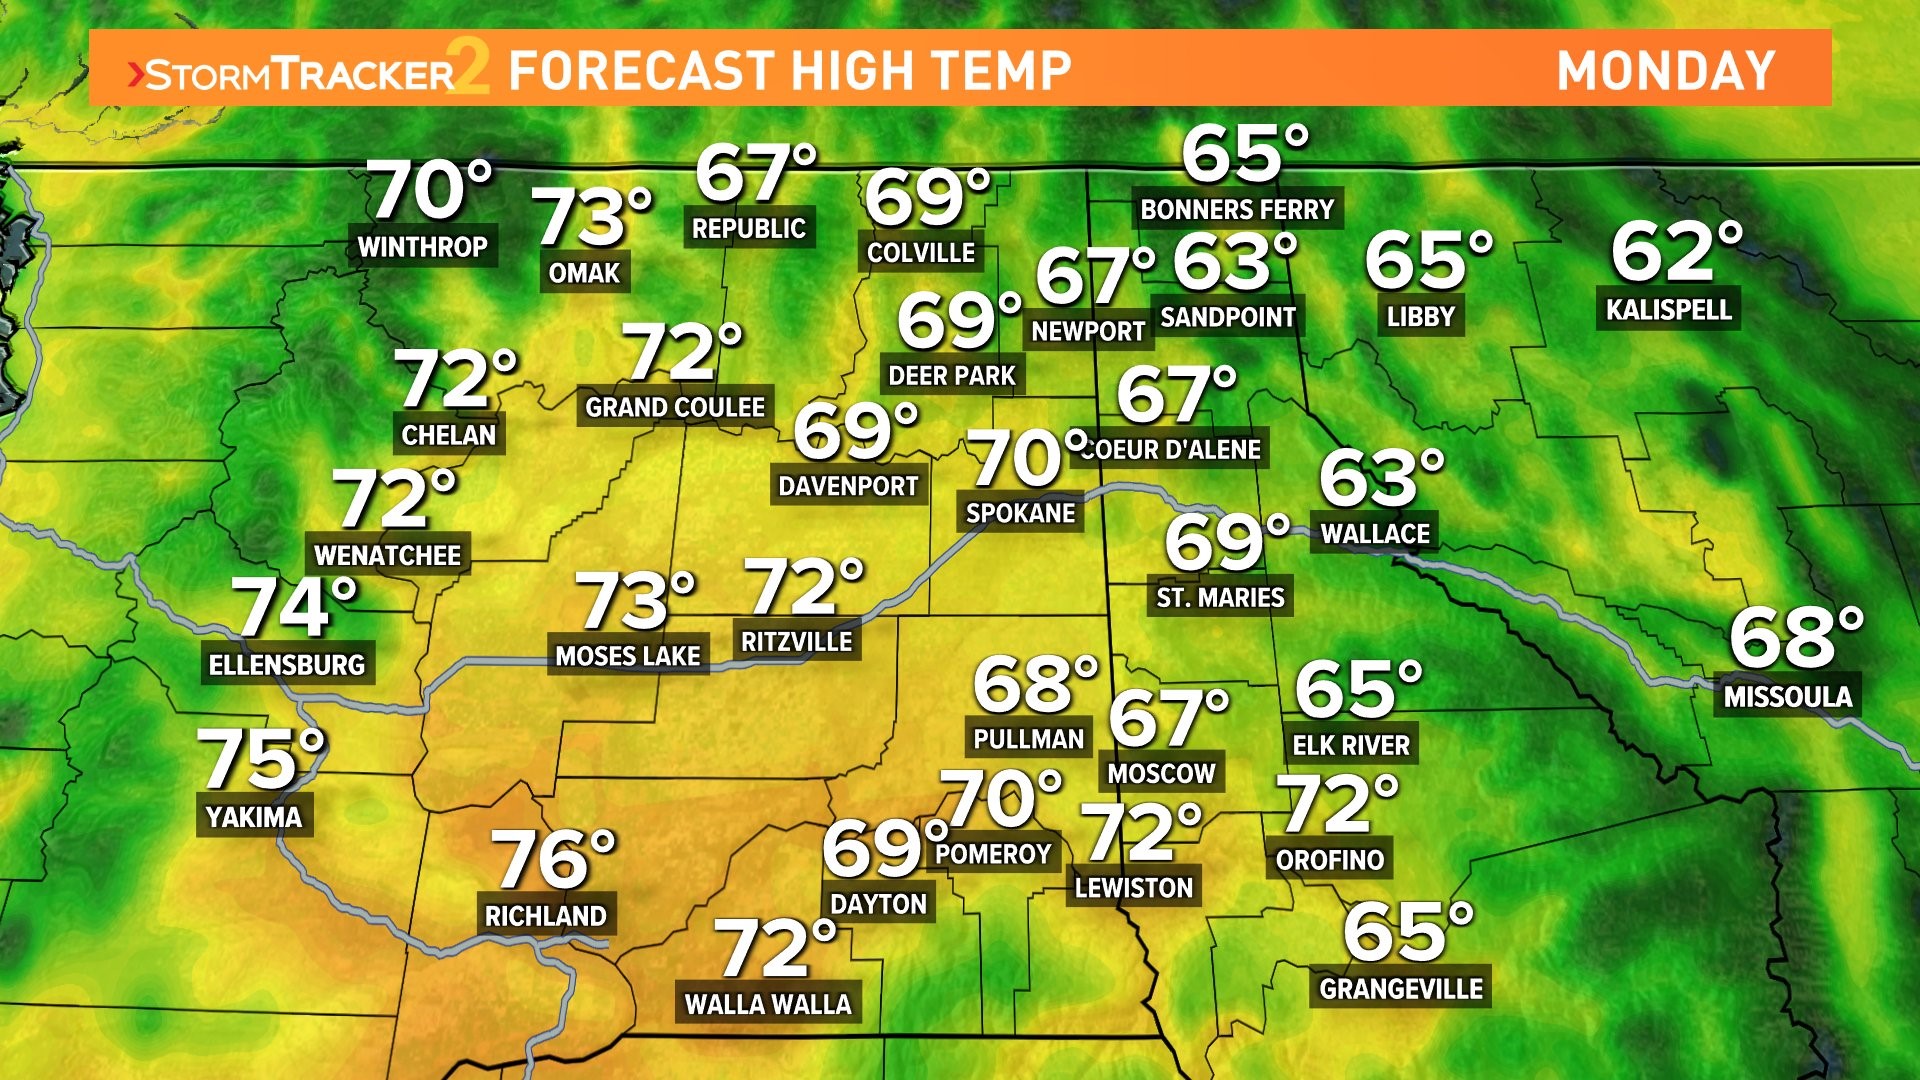 High temps will hit the low 70s for some in the Inland Northwest, setting record-high temperatures.